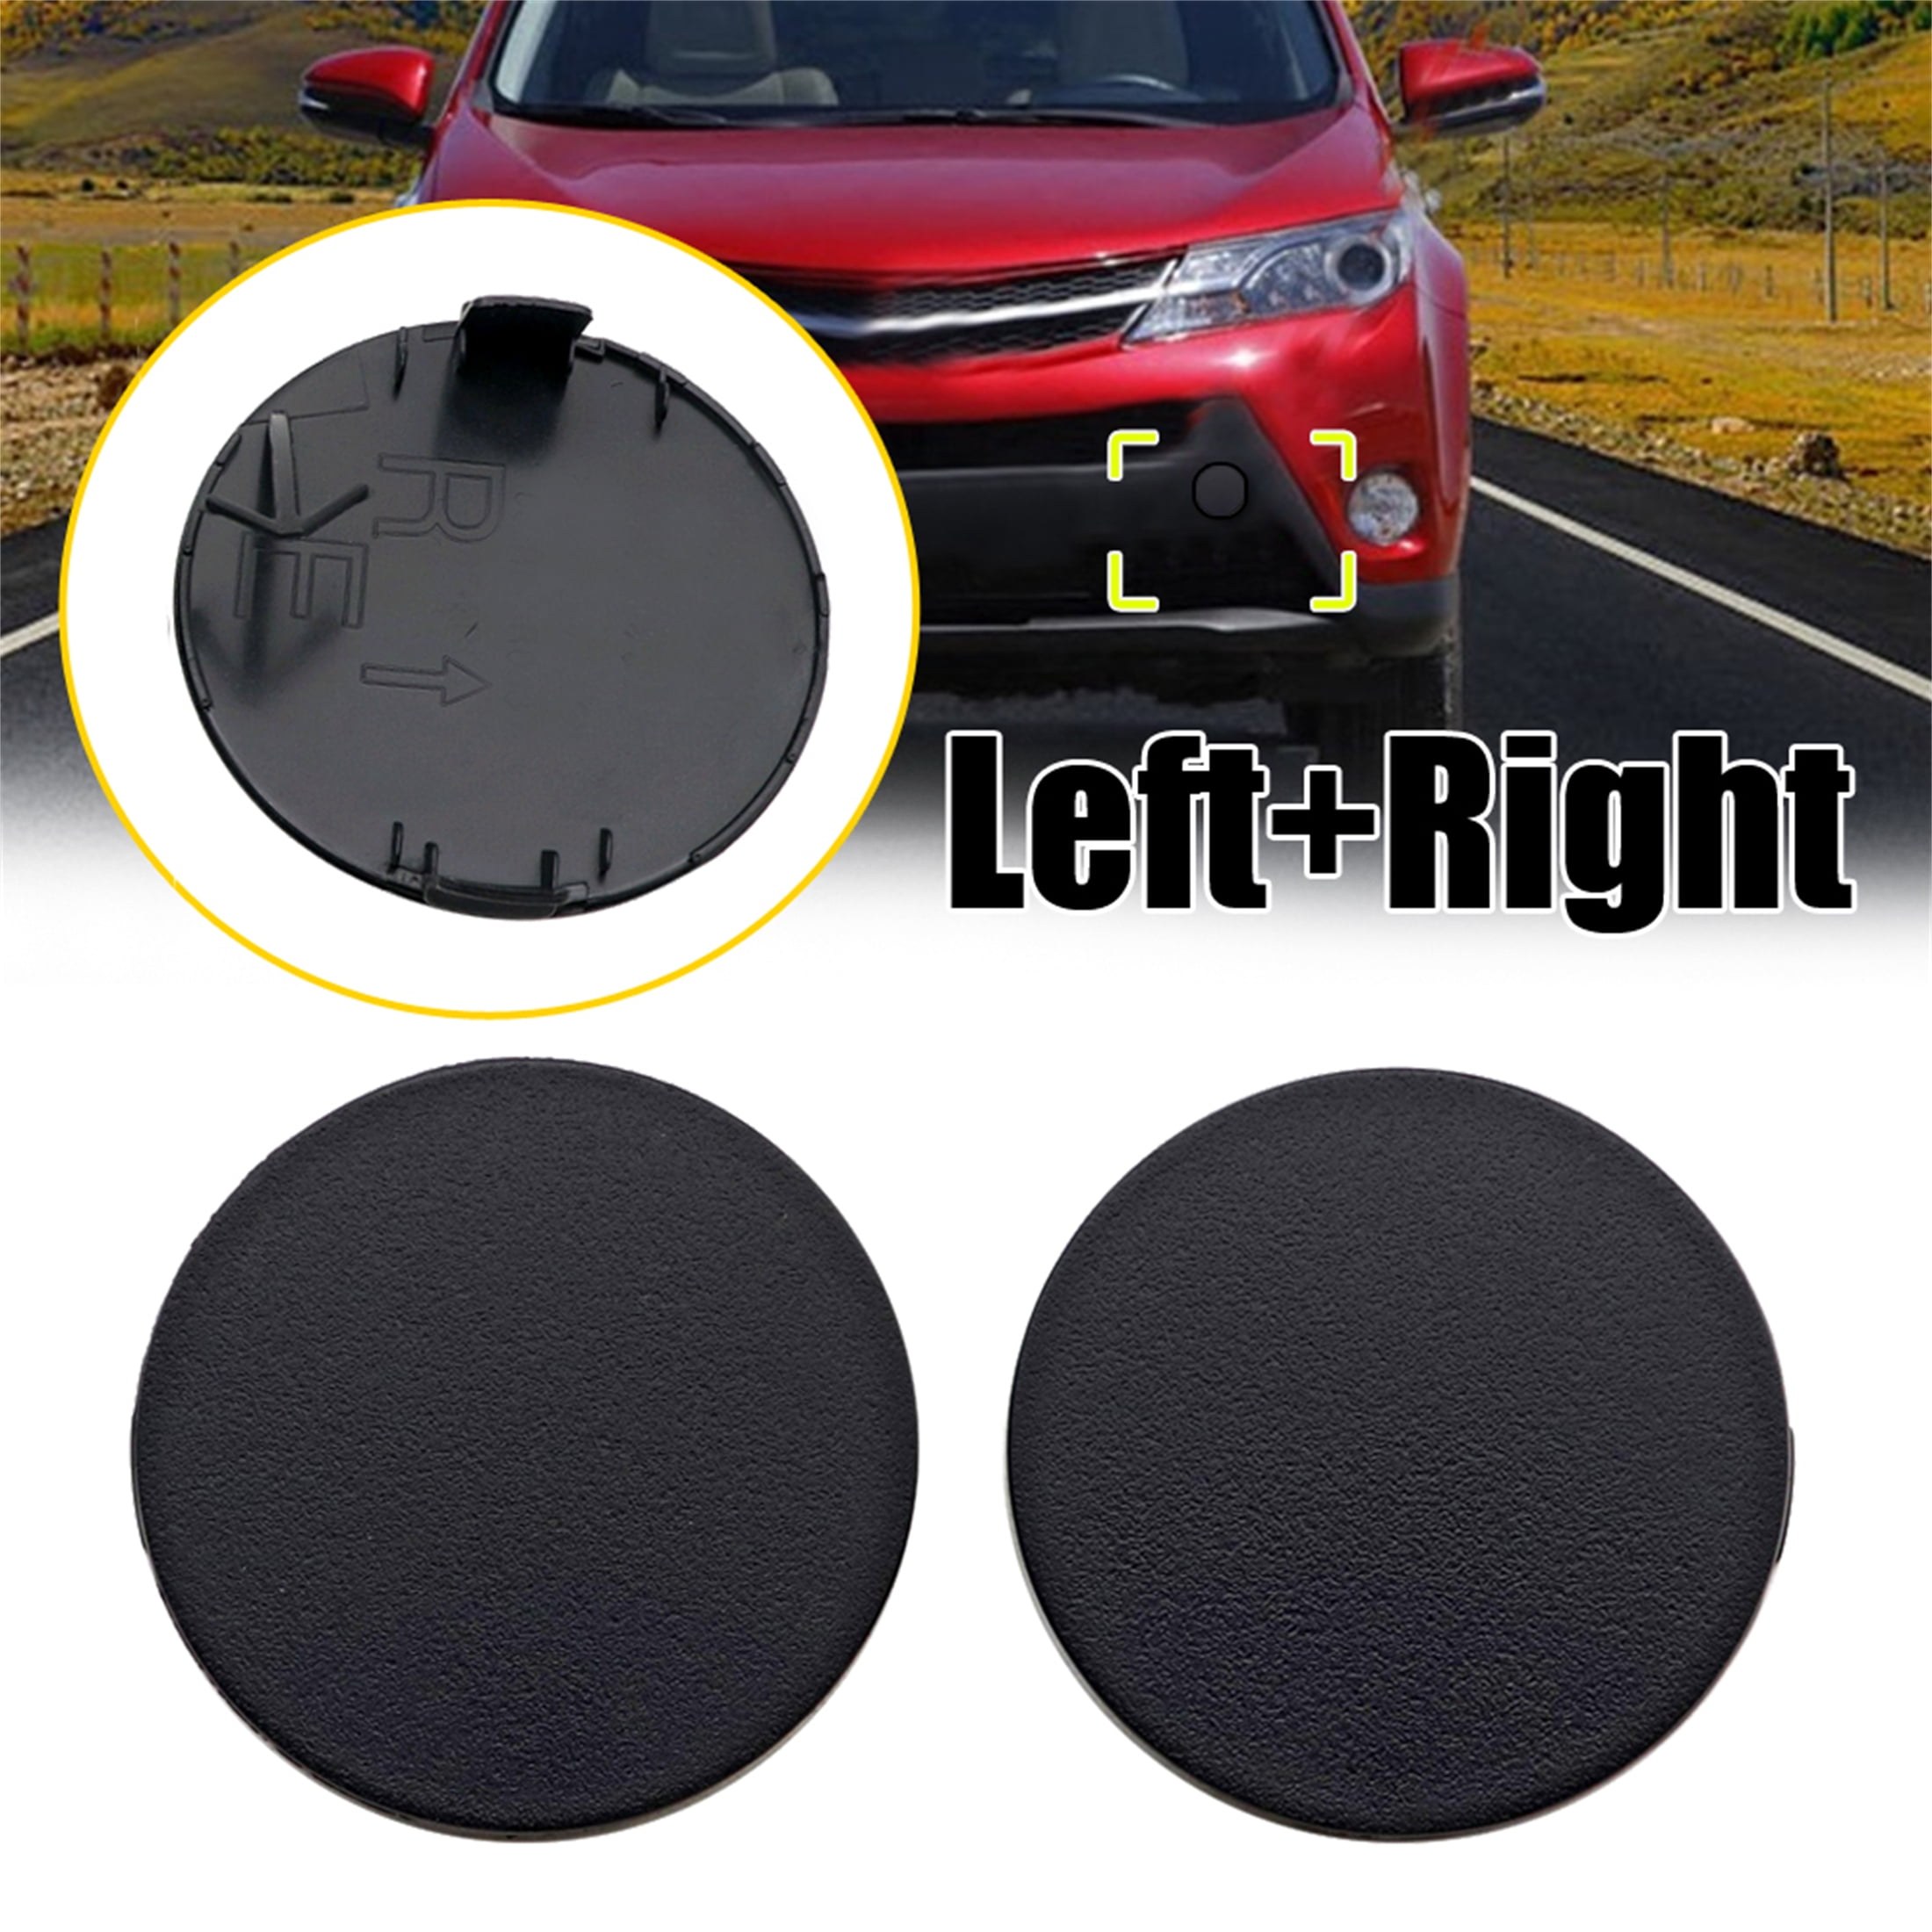 Right Front Bumper Tow Hook Cover Replacement Parts Fit For TOYOTA RAV4 2013-2015 Accessories - Walmart.com